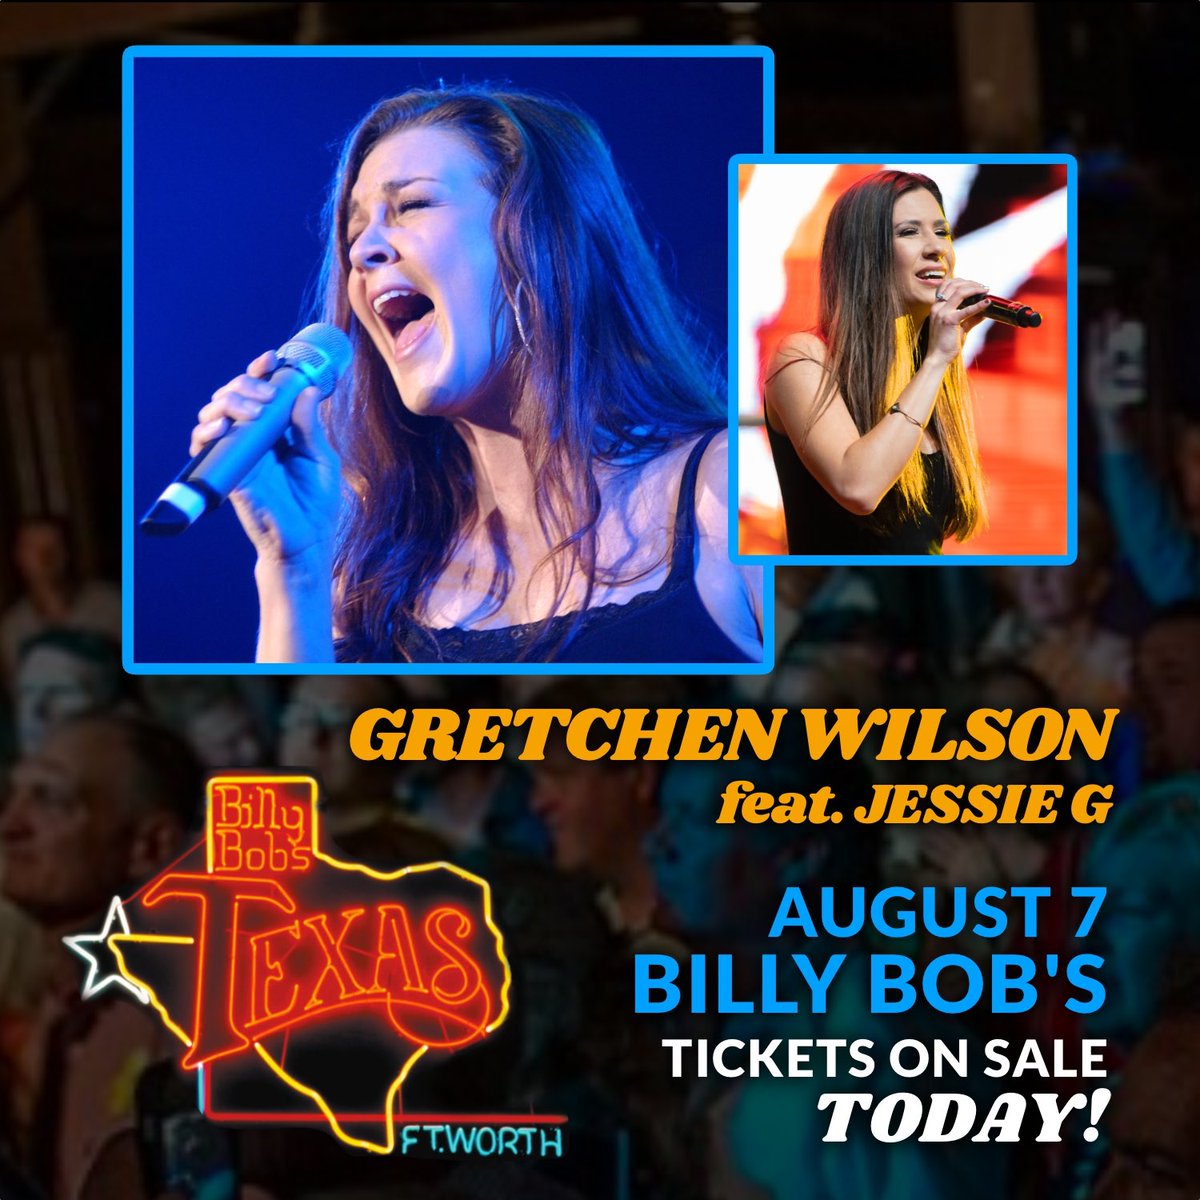 Very excited to finally (and safely!) get back on stage at @BillyBobsTexas on August 7 – tickets are on sale today for my show with @JessieG_Music, right here: axs.com/events/395794/… Don’t miss it – it’s gonna be BIG to make up for the break! 💥🎶